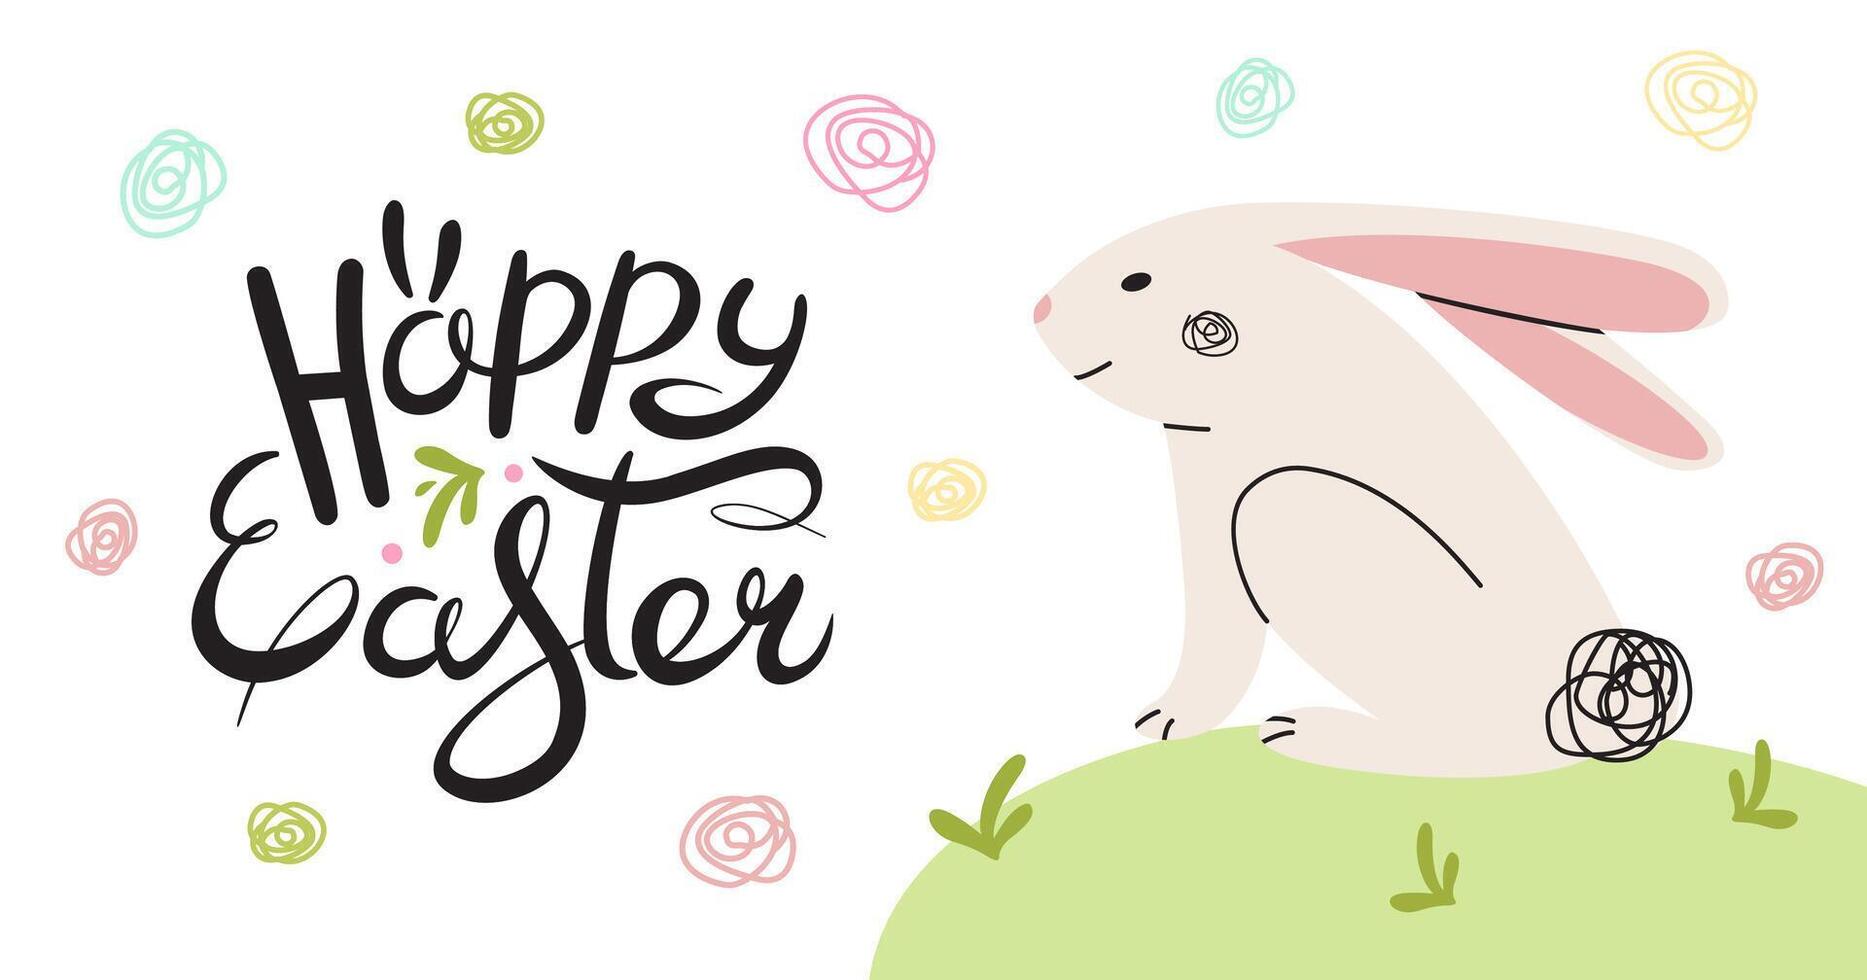 Modern happy Easter banner with hand drawn rabbit. Modern minimal style. Horizontal Greeting Card. Cute Easter bunny and lettering. Festive background for invitations. Vector flat illustration.